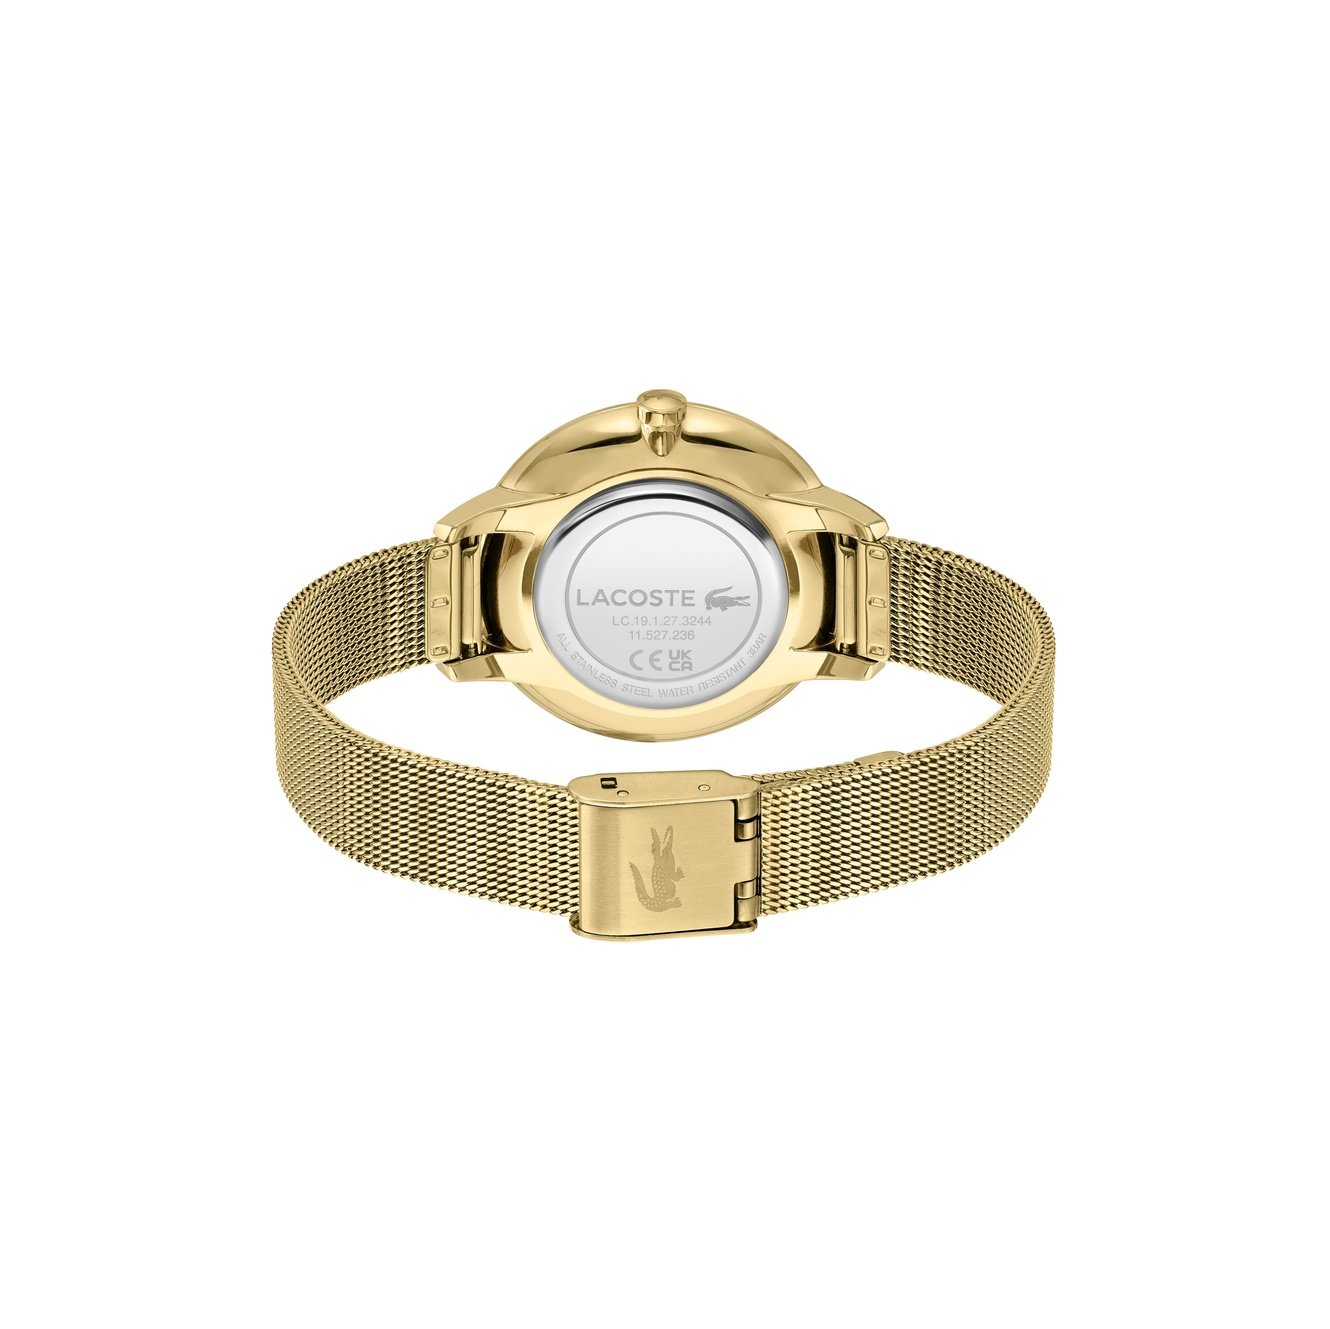 Ladies Cannes Watch 2001254 Lacoste